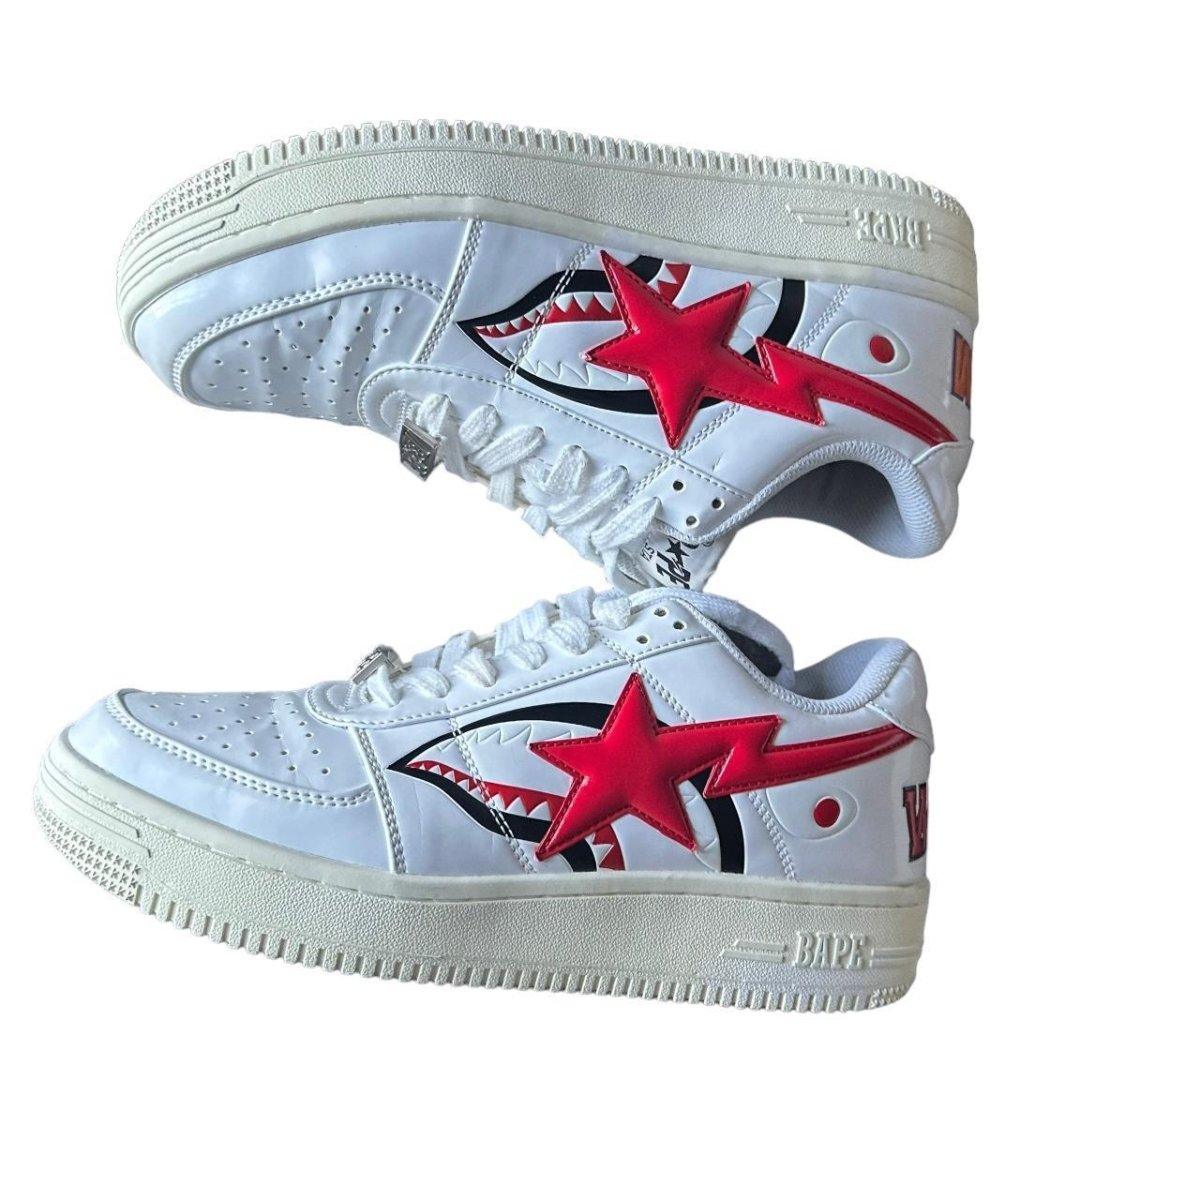 A Bathing Ape Bape SK8 Bapesta Low Red White - Known Source